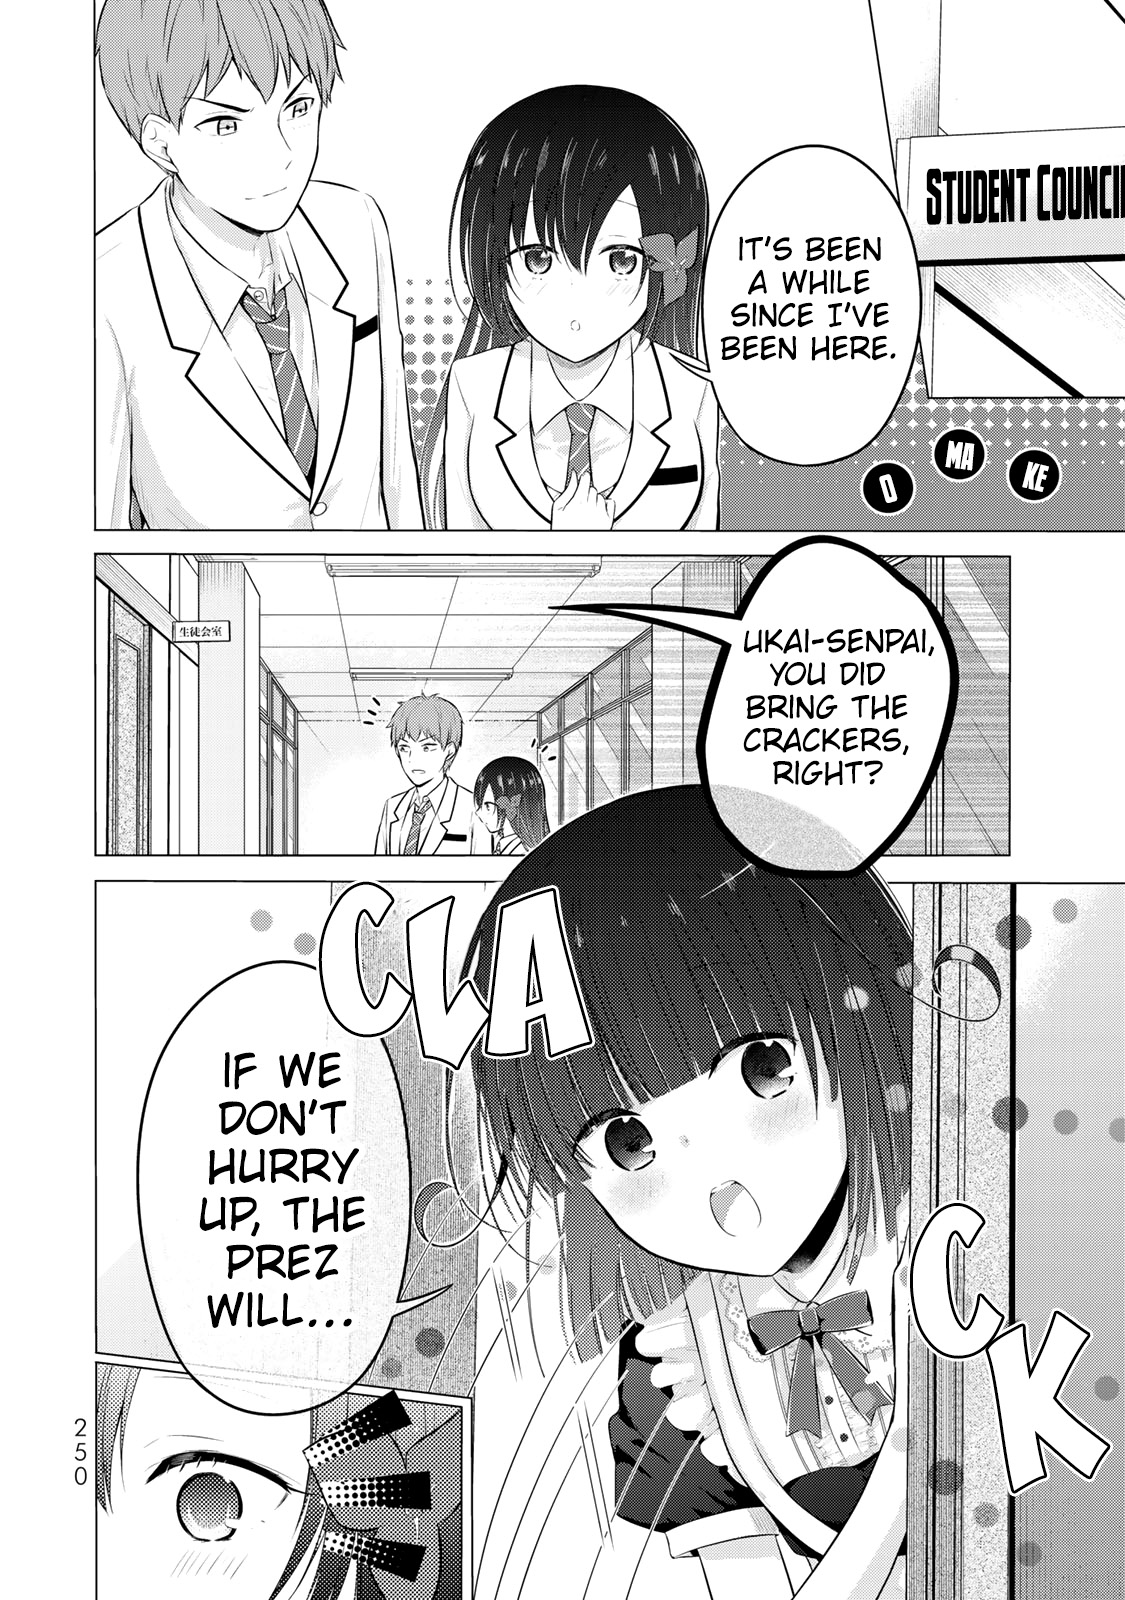 The Student Council President Solves Everything On The Bed - Page 2